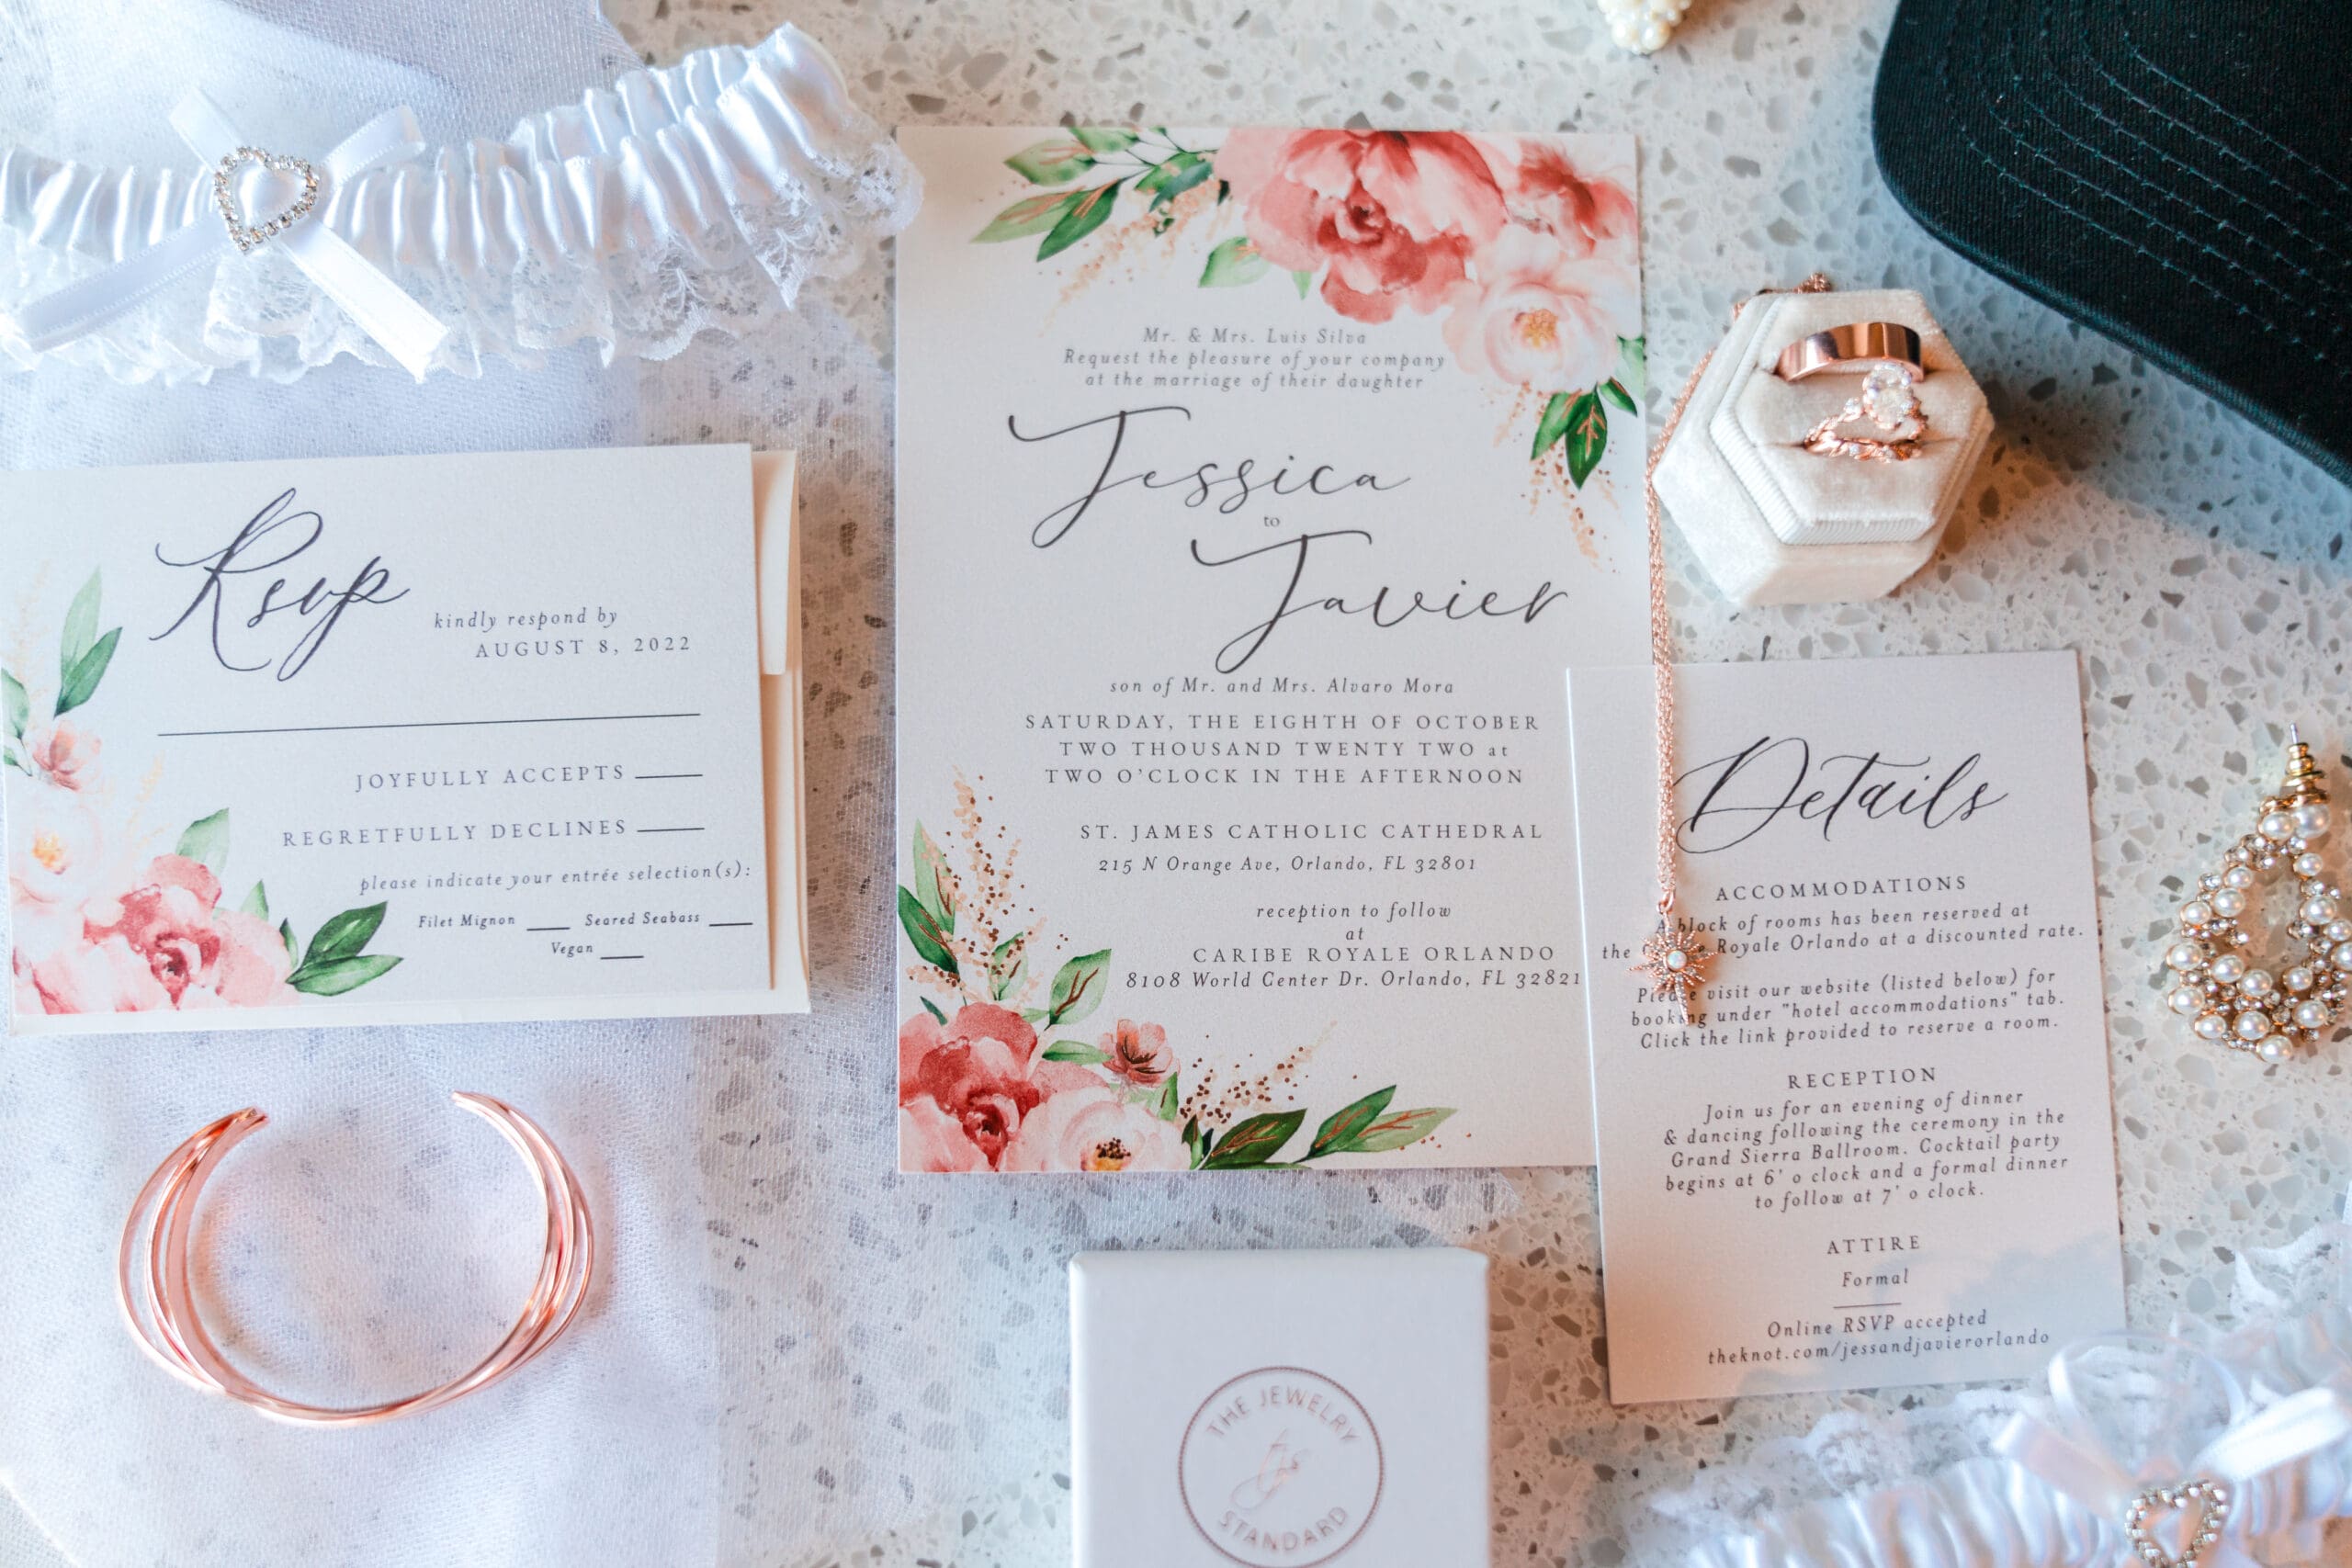 Close-up shot of wedding rings, bands, and stationary including RSVP details arranged on a table.